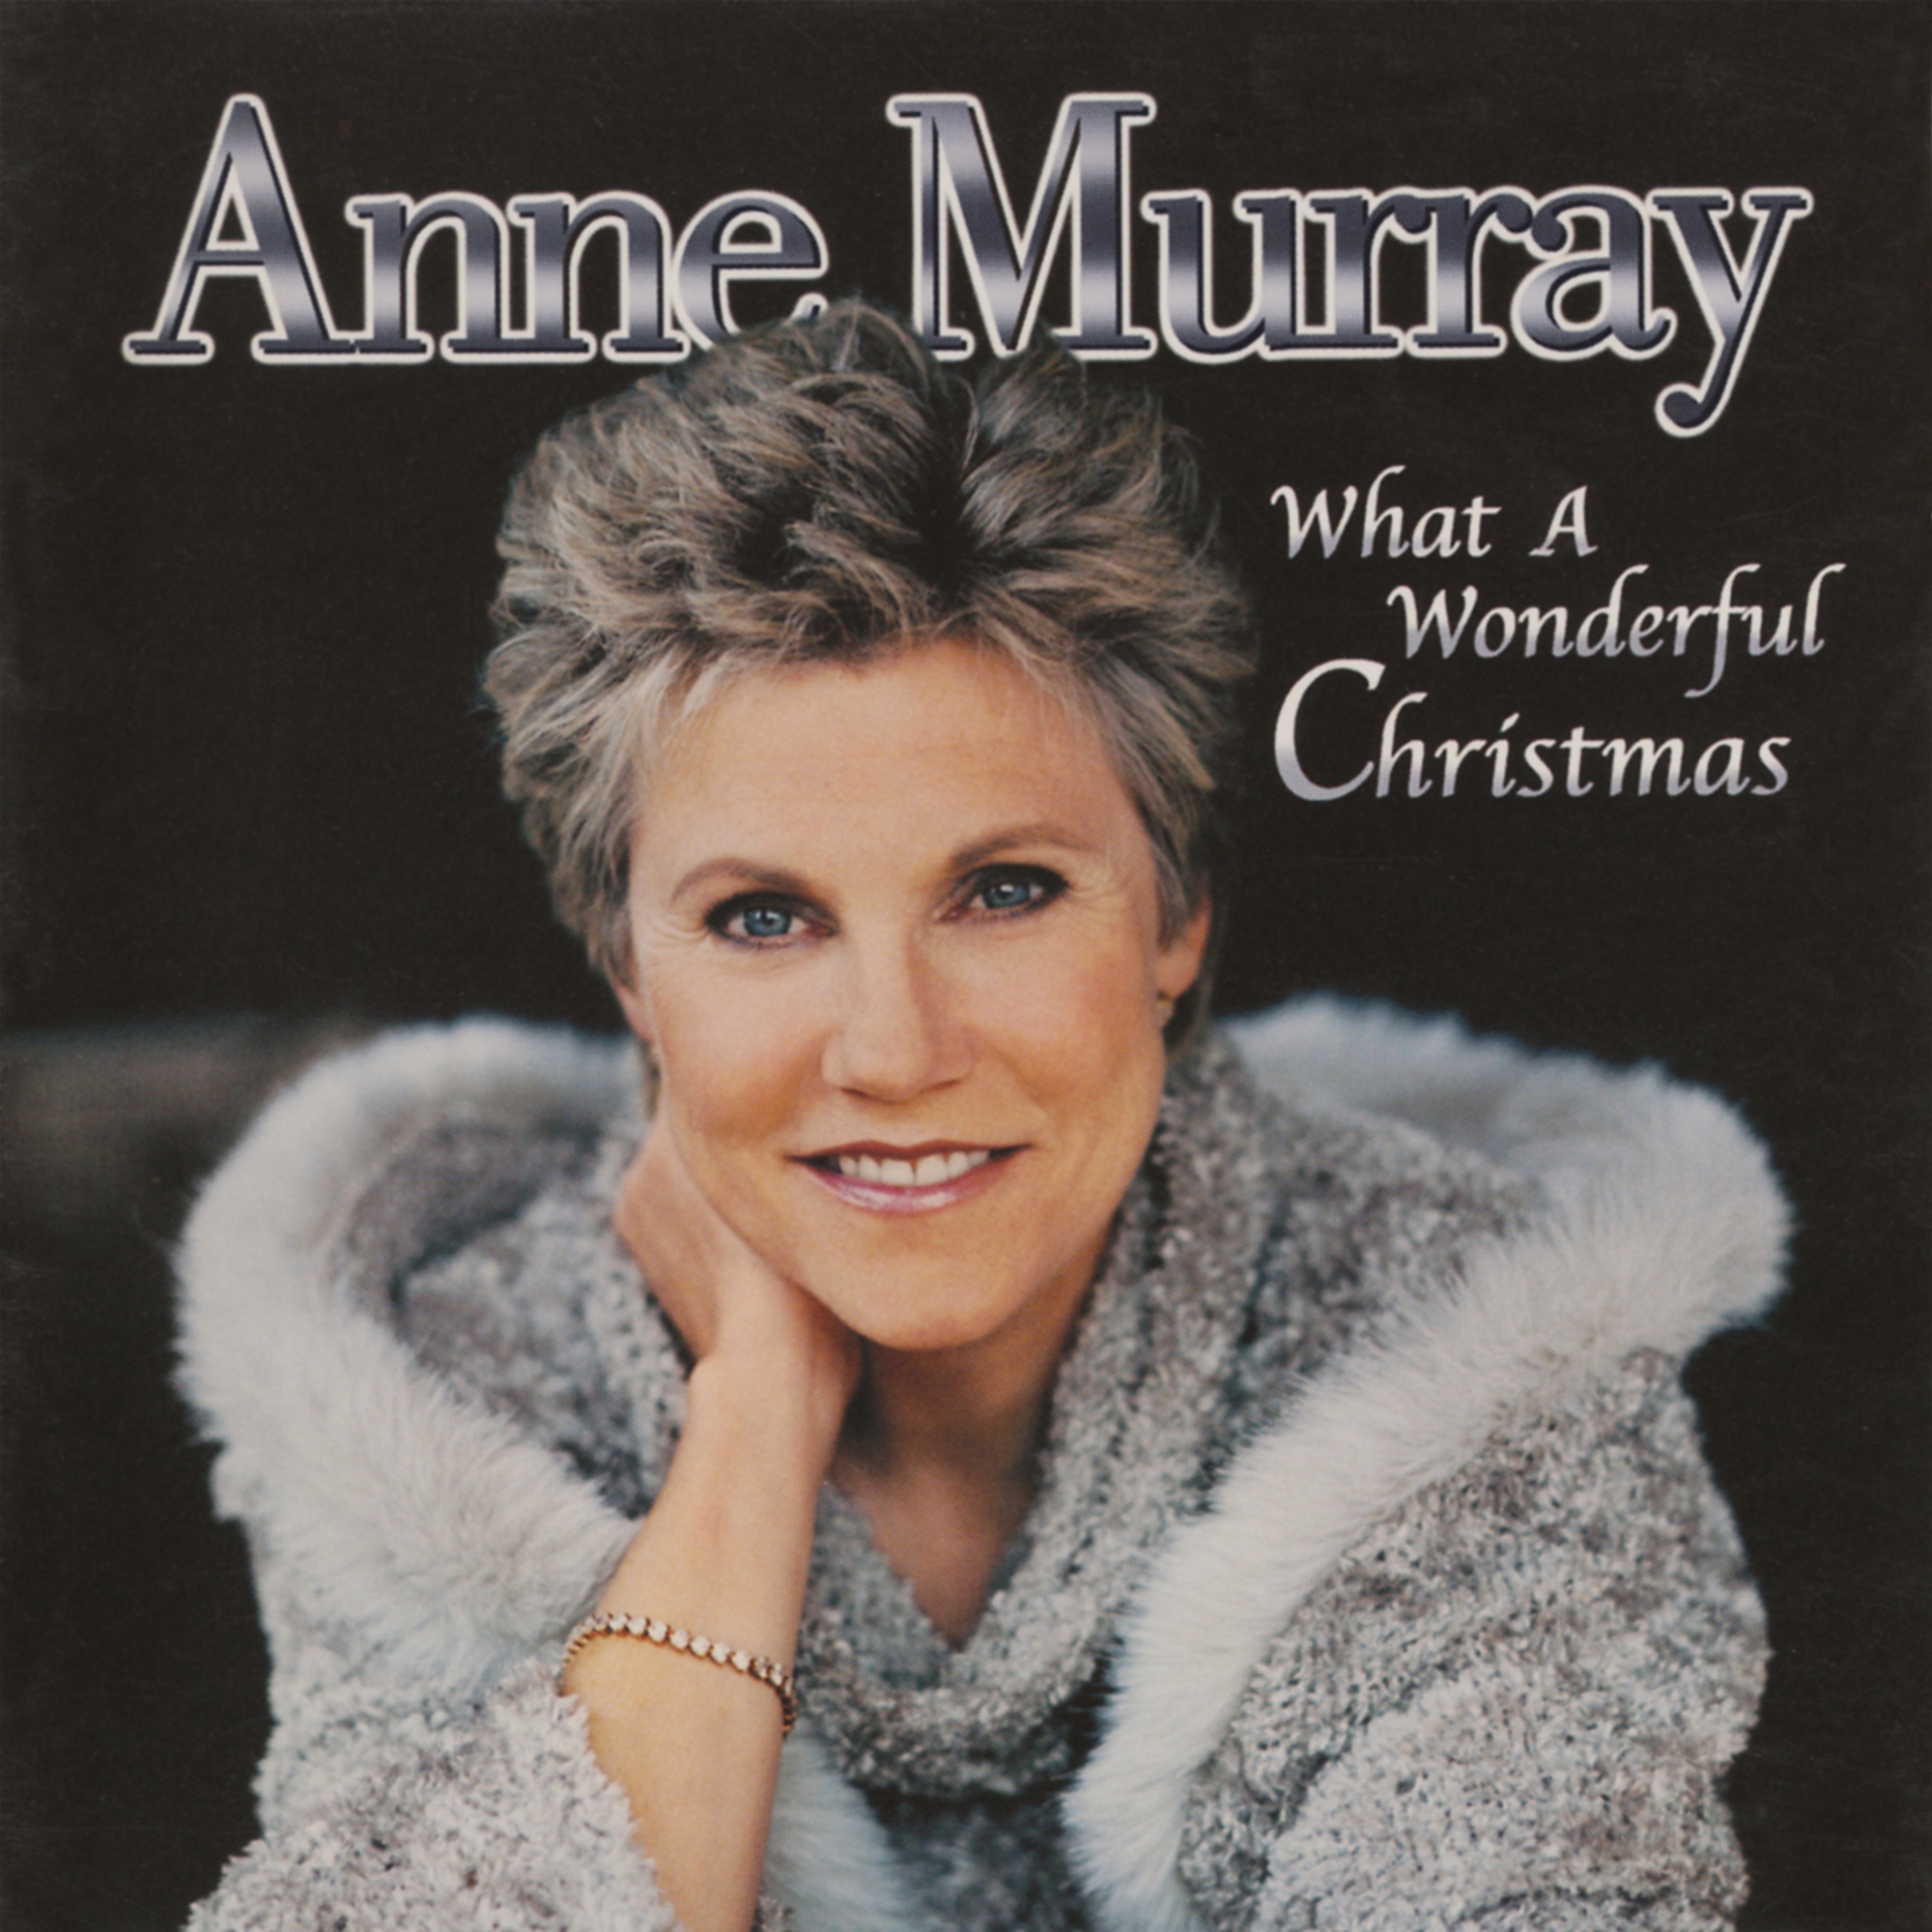 Art for Mary's Little Boy Child/Oh My Lord by Anne Murray